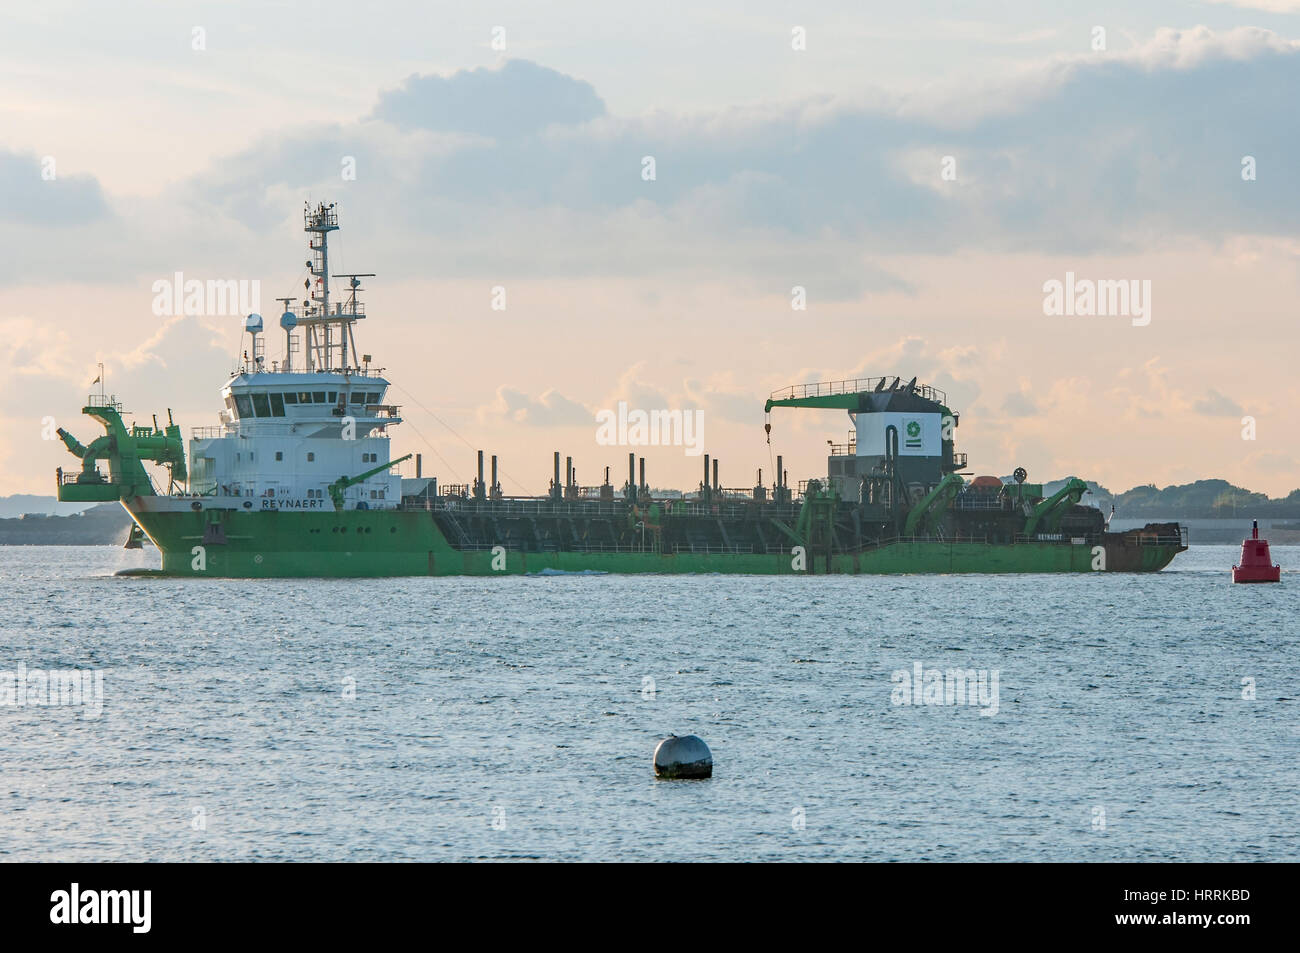 MV Reynaert, a Trailing Suction Hopper Dredger, in The Solent. Stock Photo